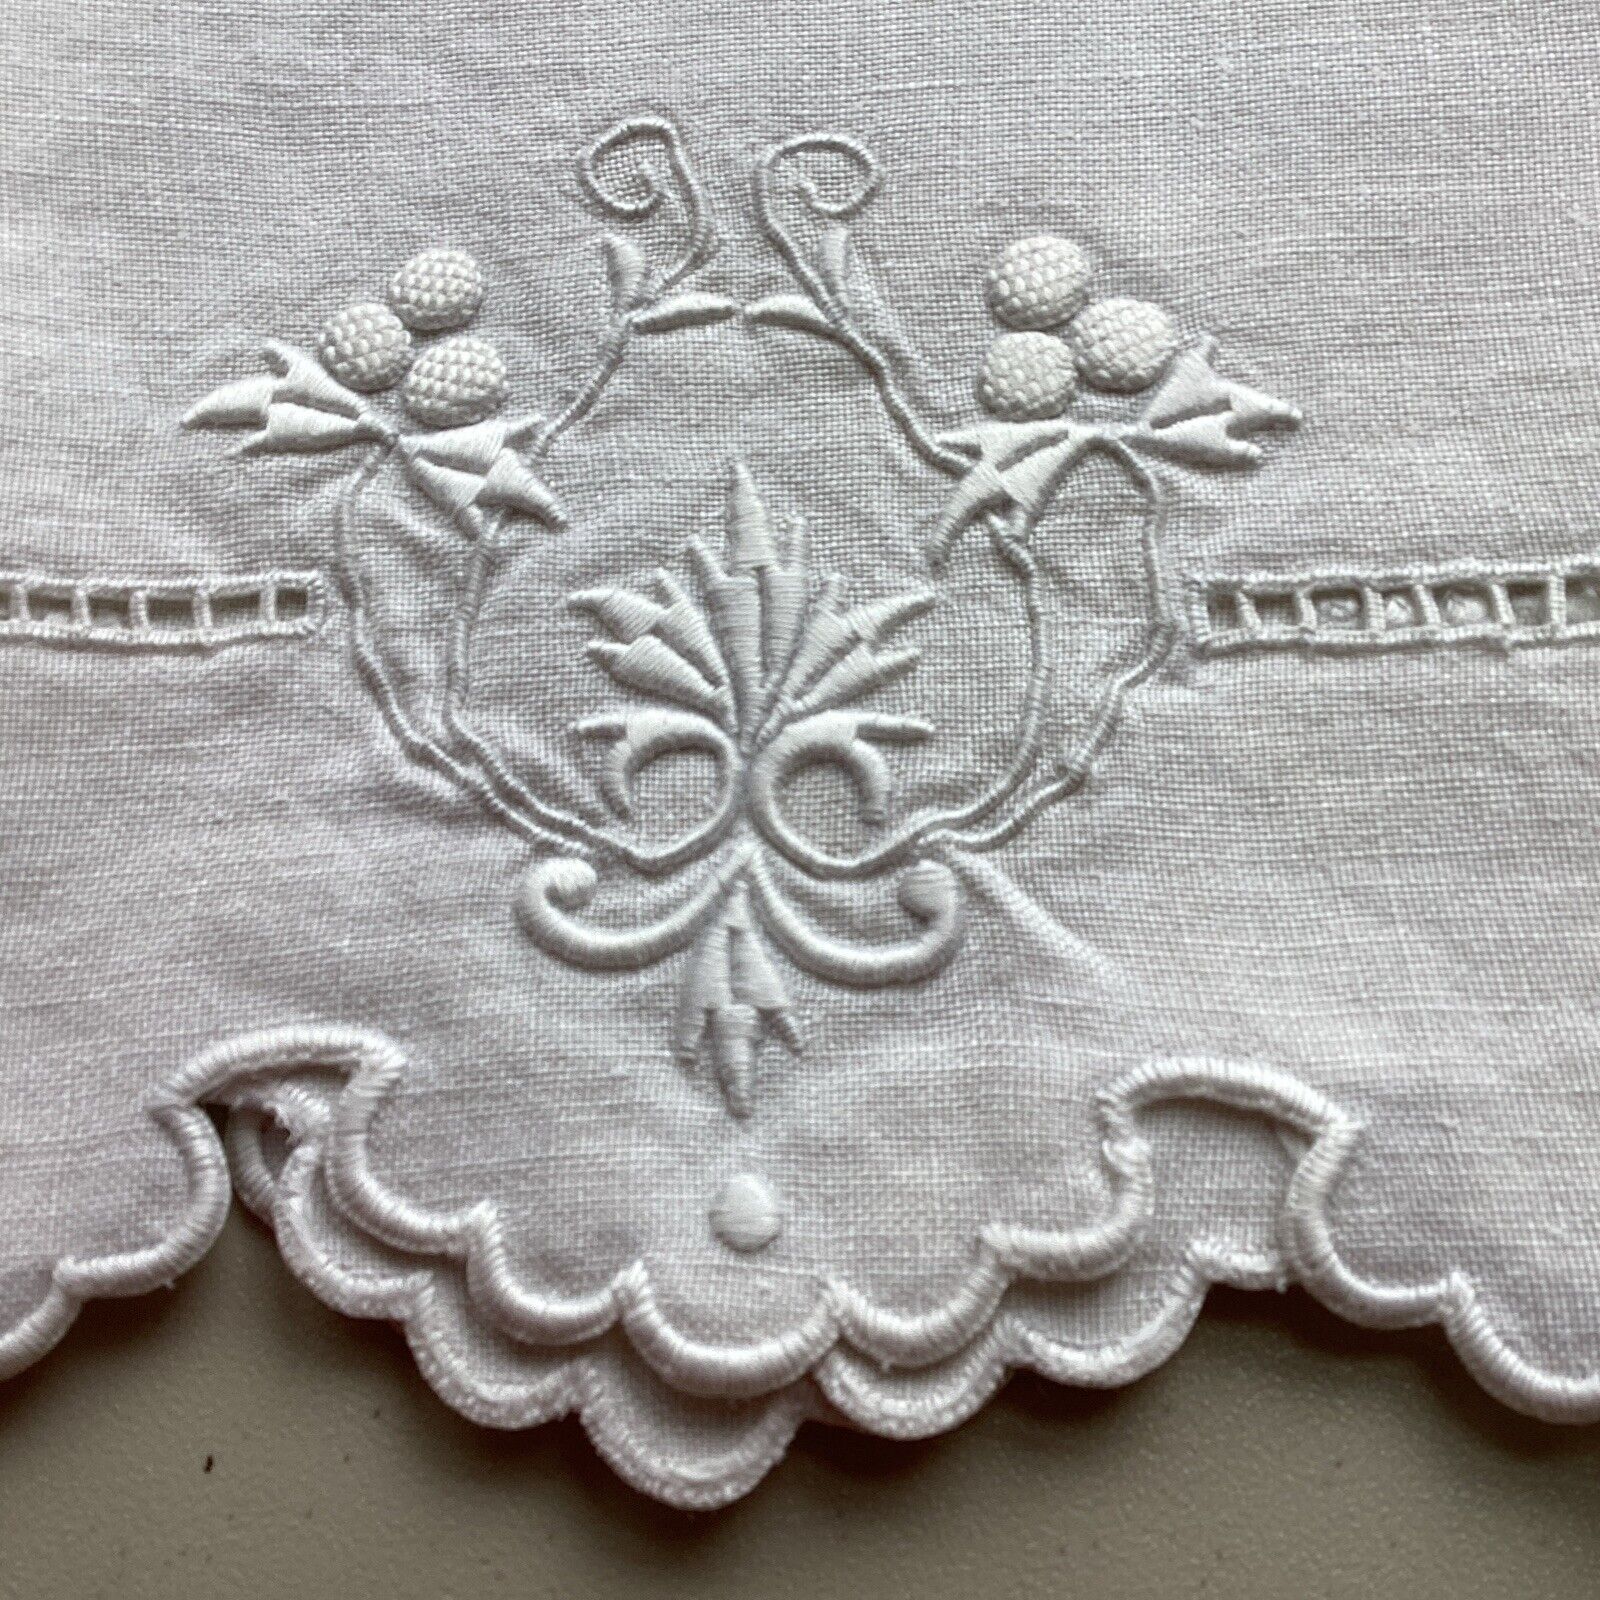 VINTAGE 1900s EXQUISITE HAND EMBROIDERED LINEN GUEST TOWEL SCALLOPED BOUND EDGES